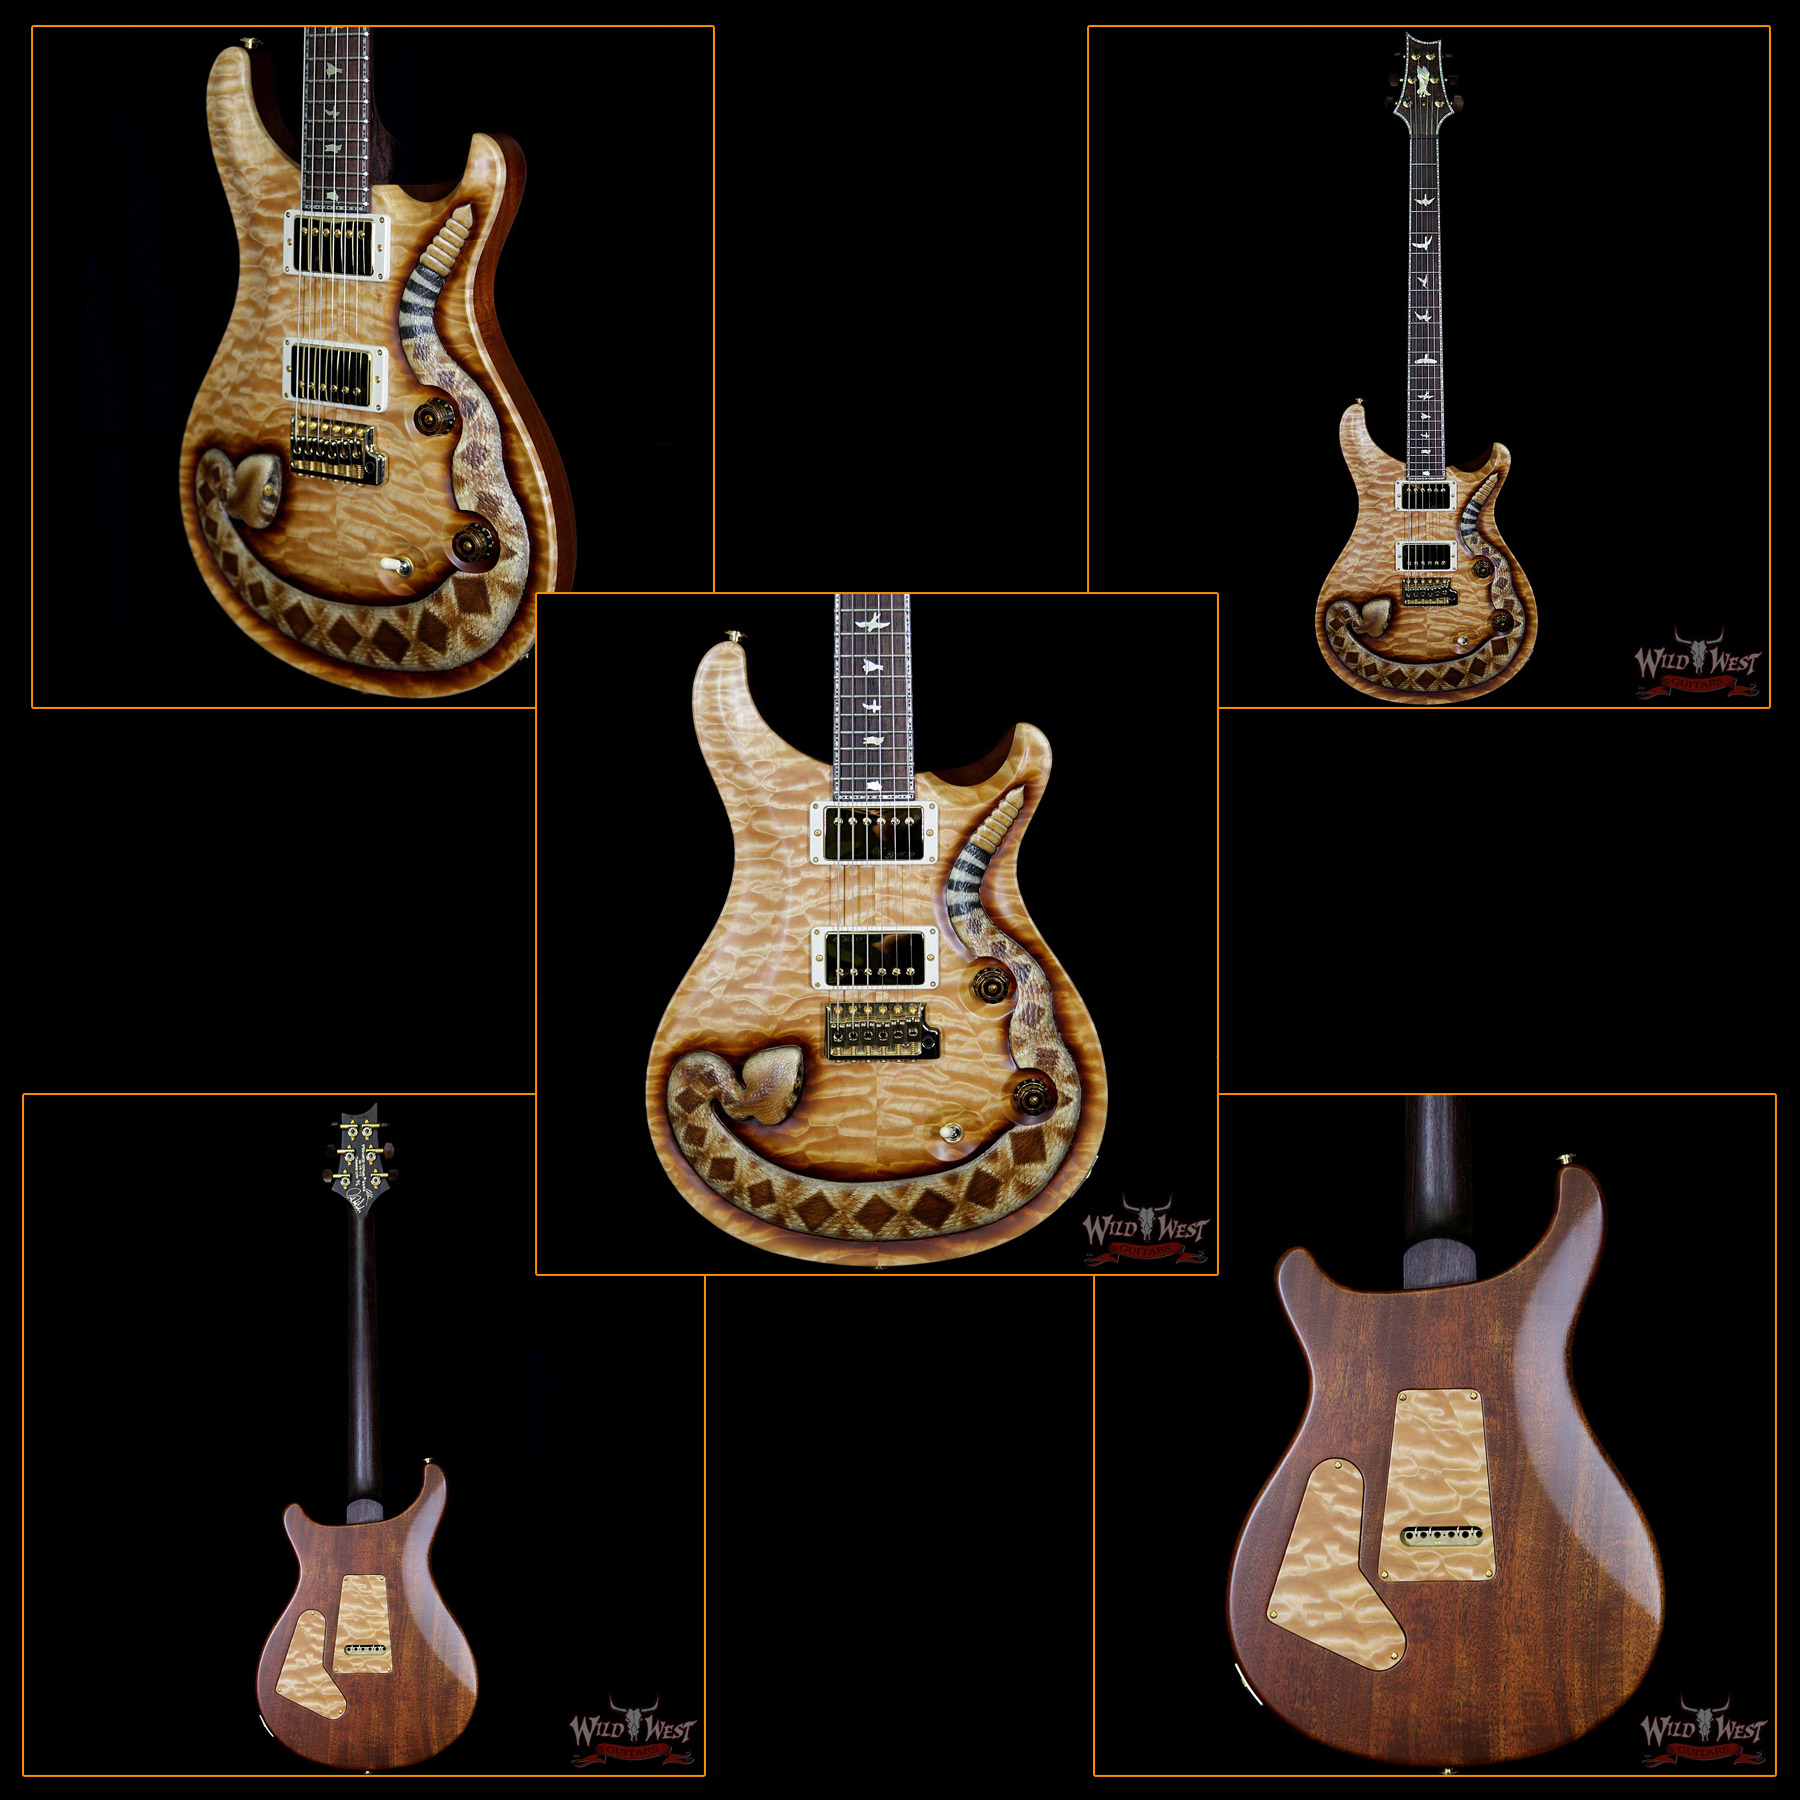 Intergalactic Supersonic PRS Private Stock Snake at The Wild West!